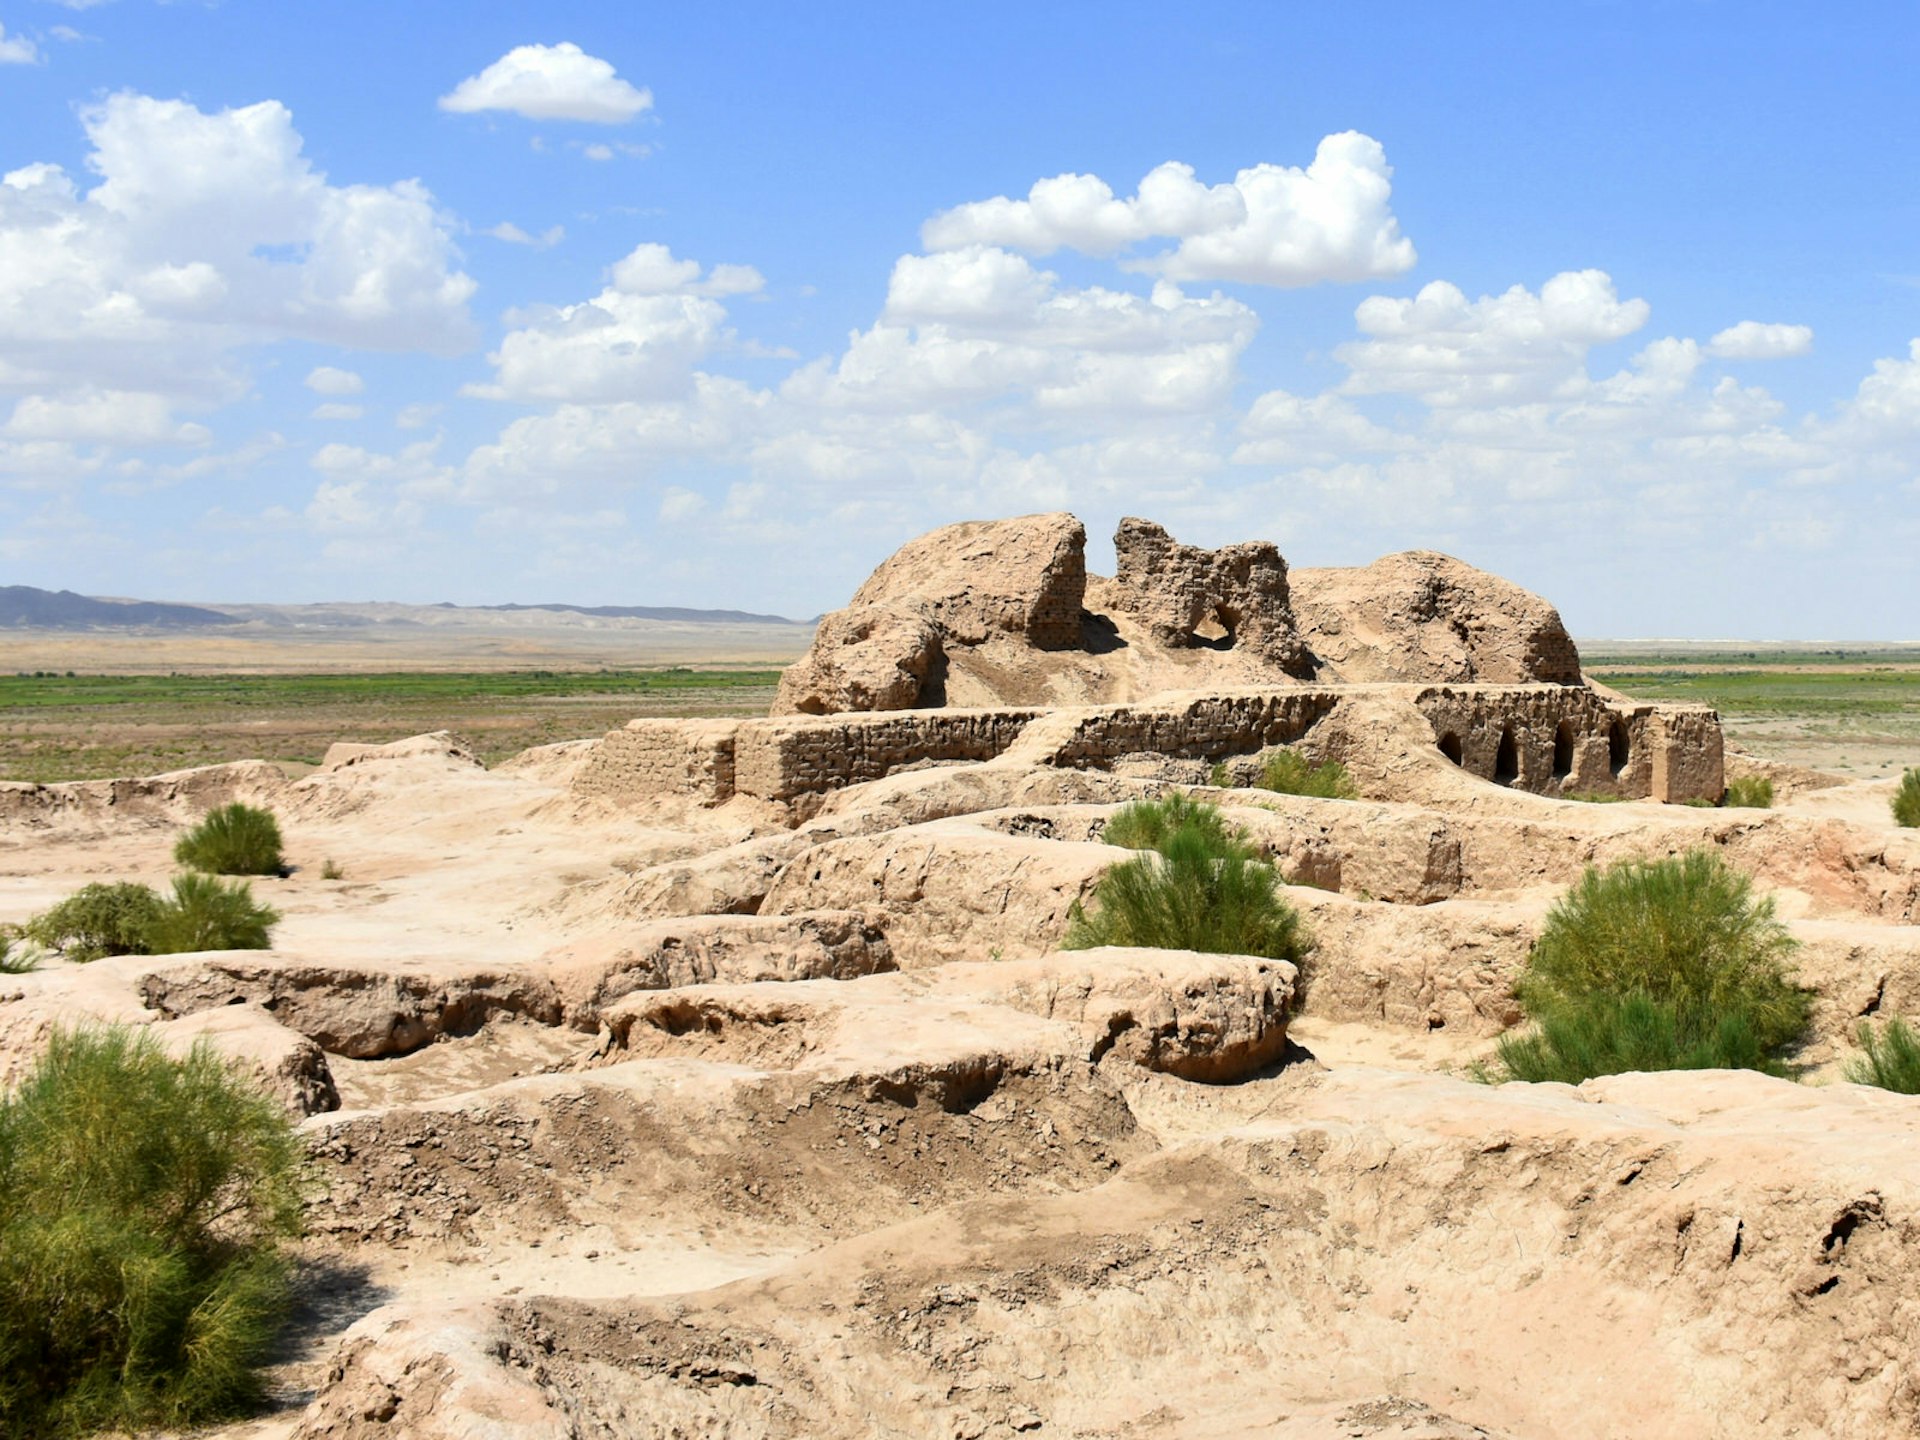 Mud remains of an ancient settlement dotted with green weeds and an open desert beyond